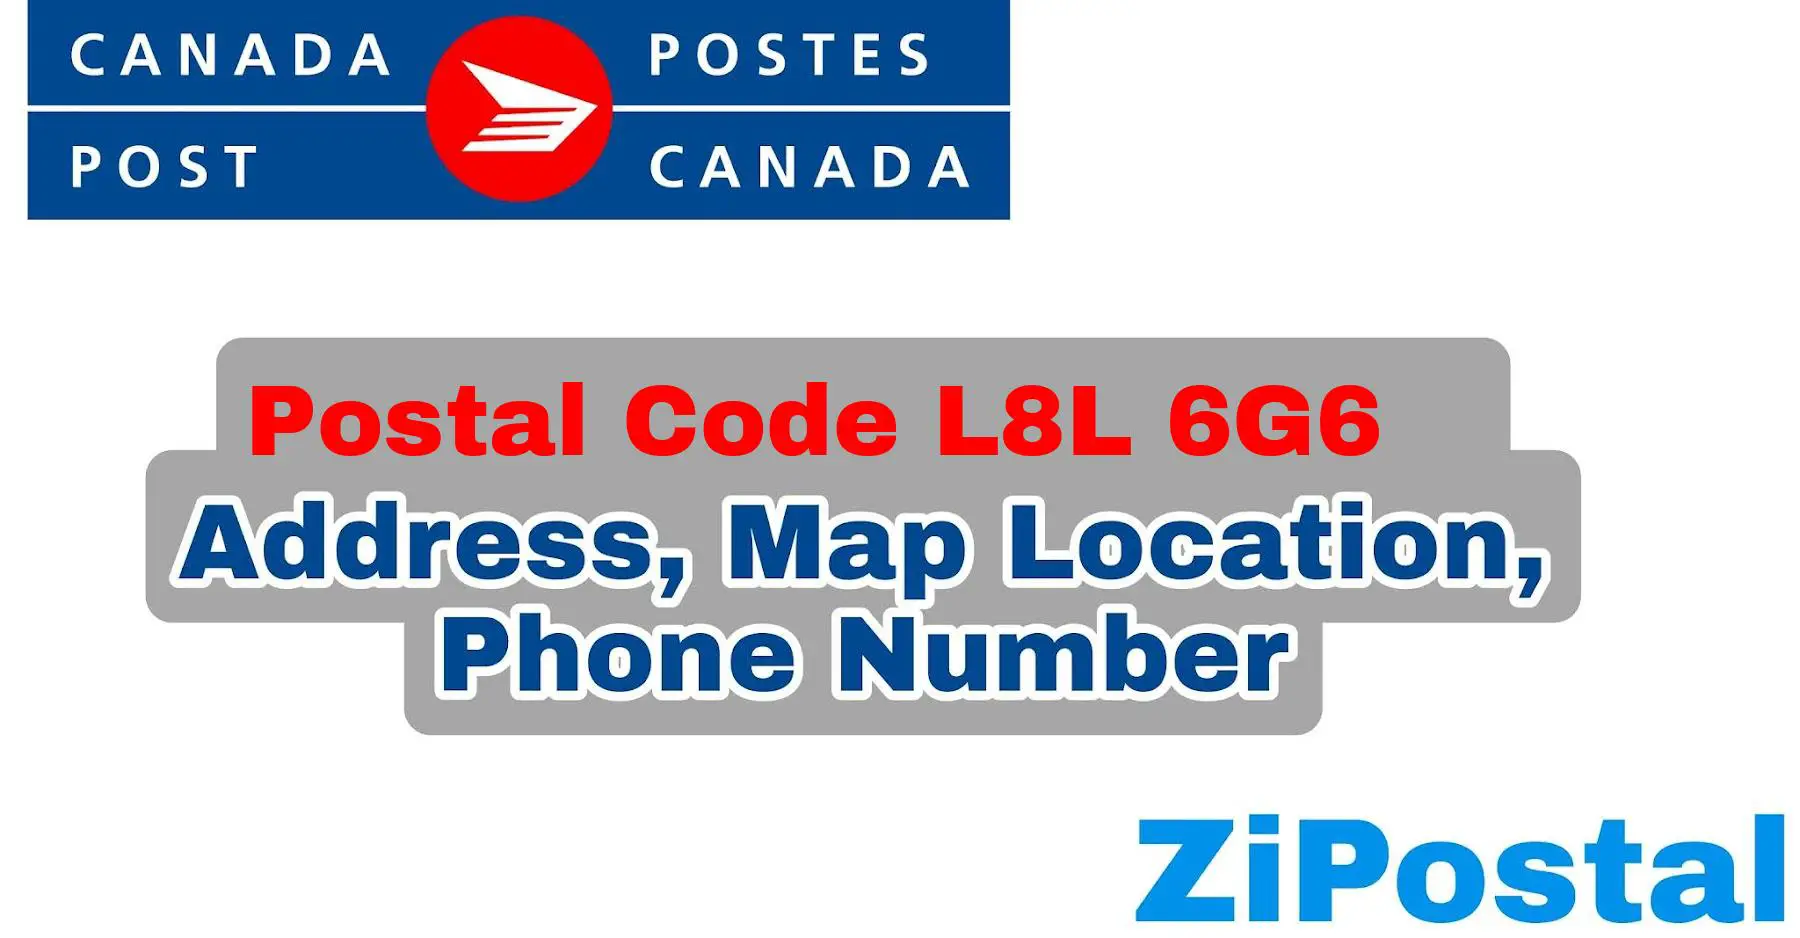 Postal Code L8L 6G6 Address Map Location and Phone Number